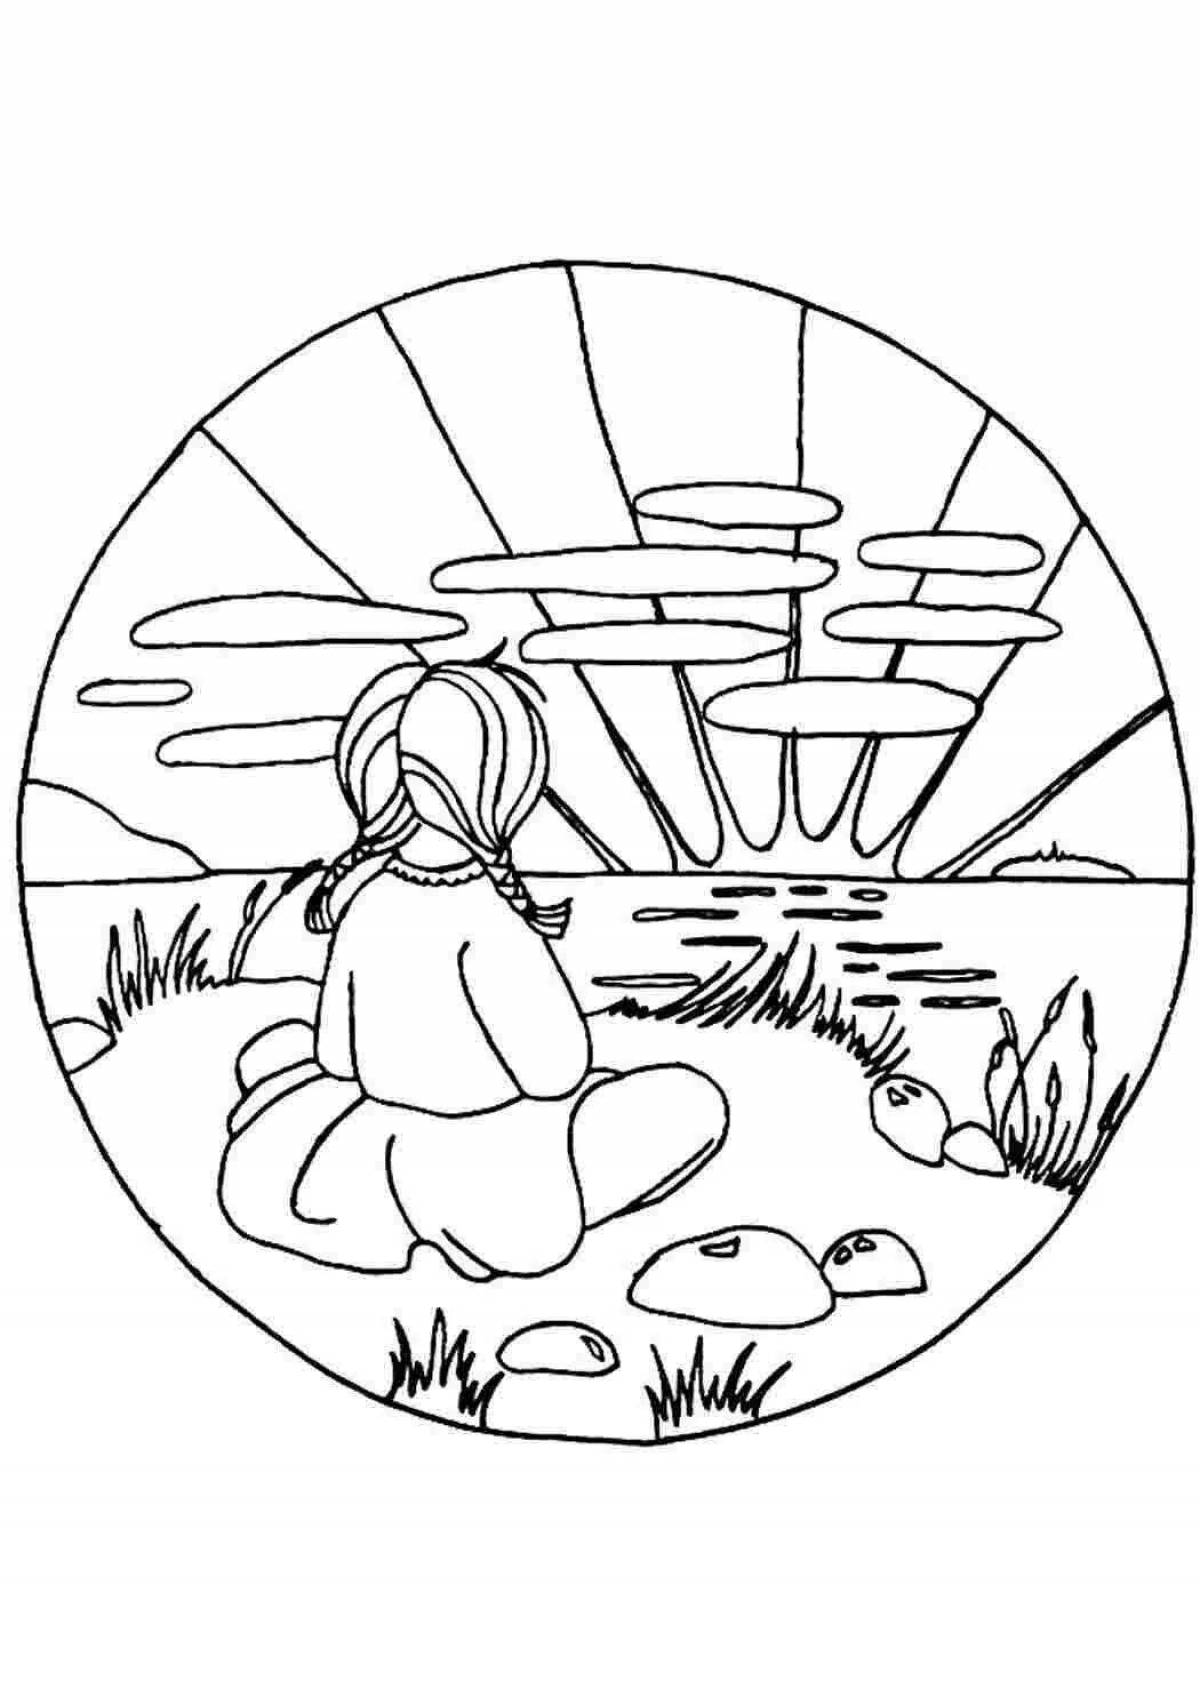 Radiant Wednesday coloring page